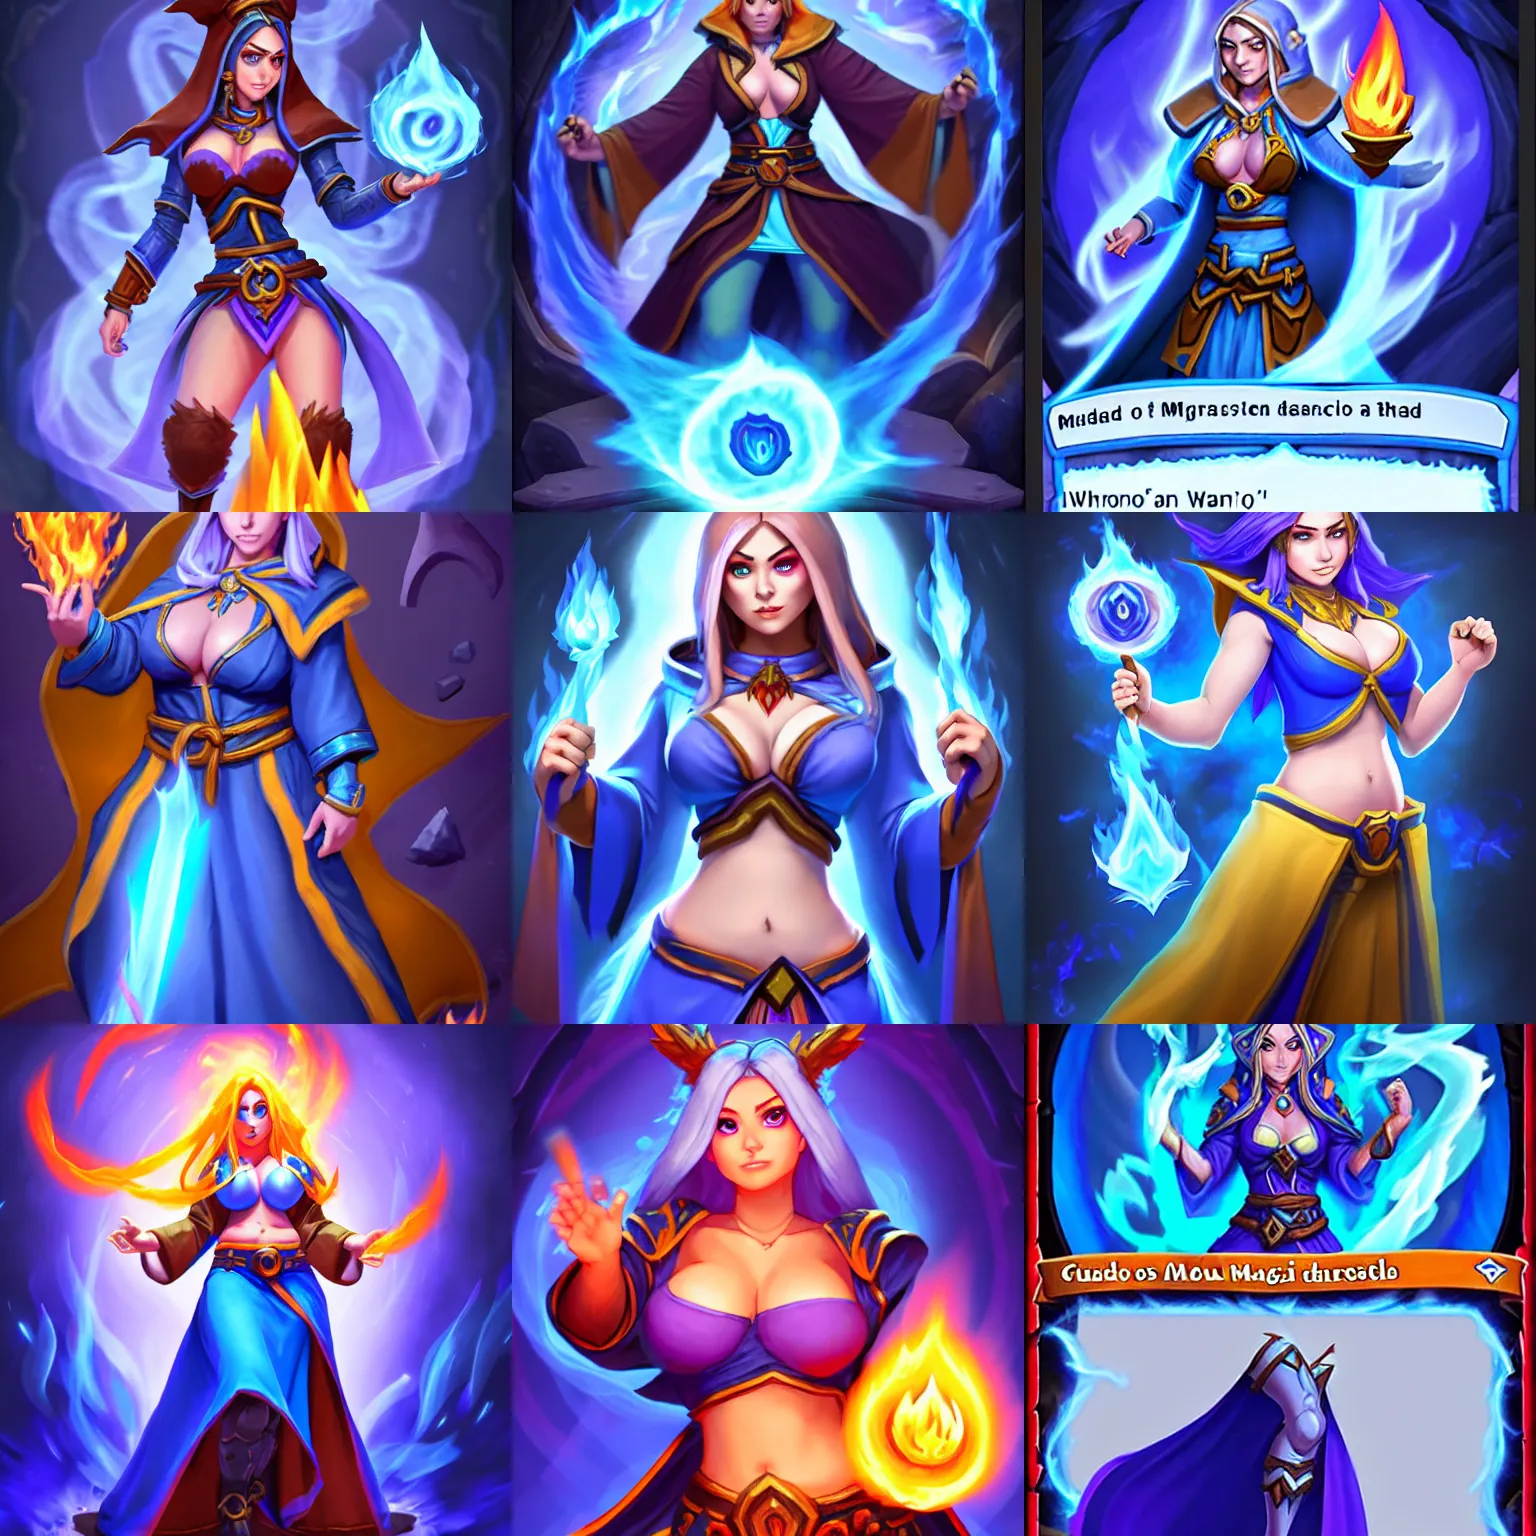 Prompt: Who : a female mage with a blue robe casting a fire spell; Physical : she has tinyest midriff ever, largest haunches ever, fullest body, small head, SFW huge breasts; Mega important : Hearthstone official splash art, SFW, perfect master piece, award winning